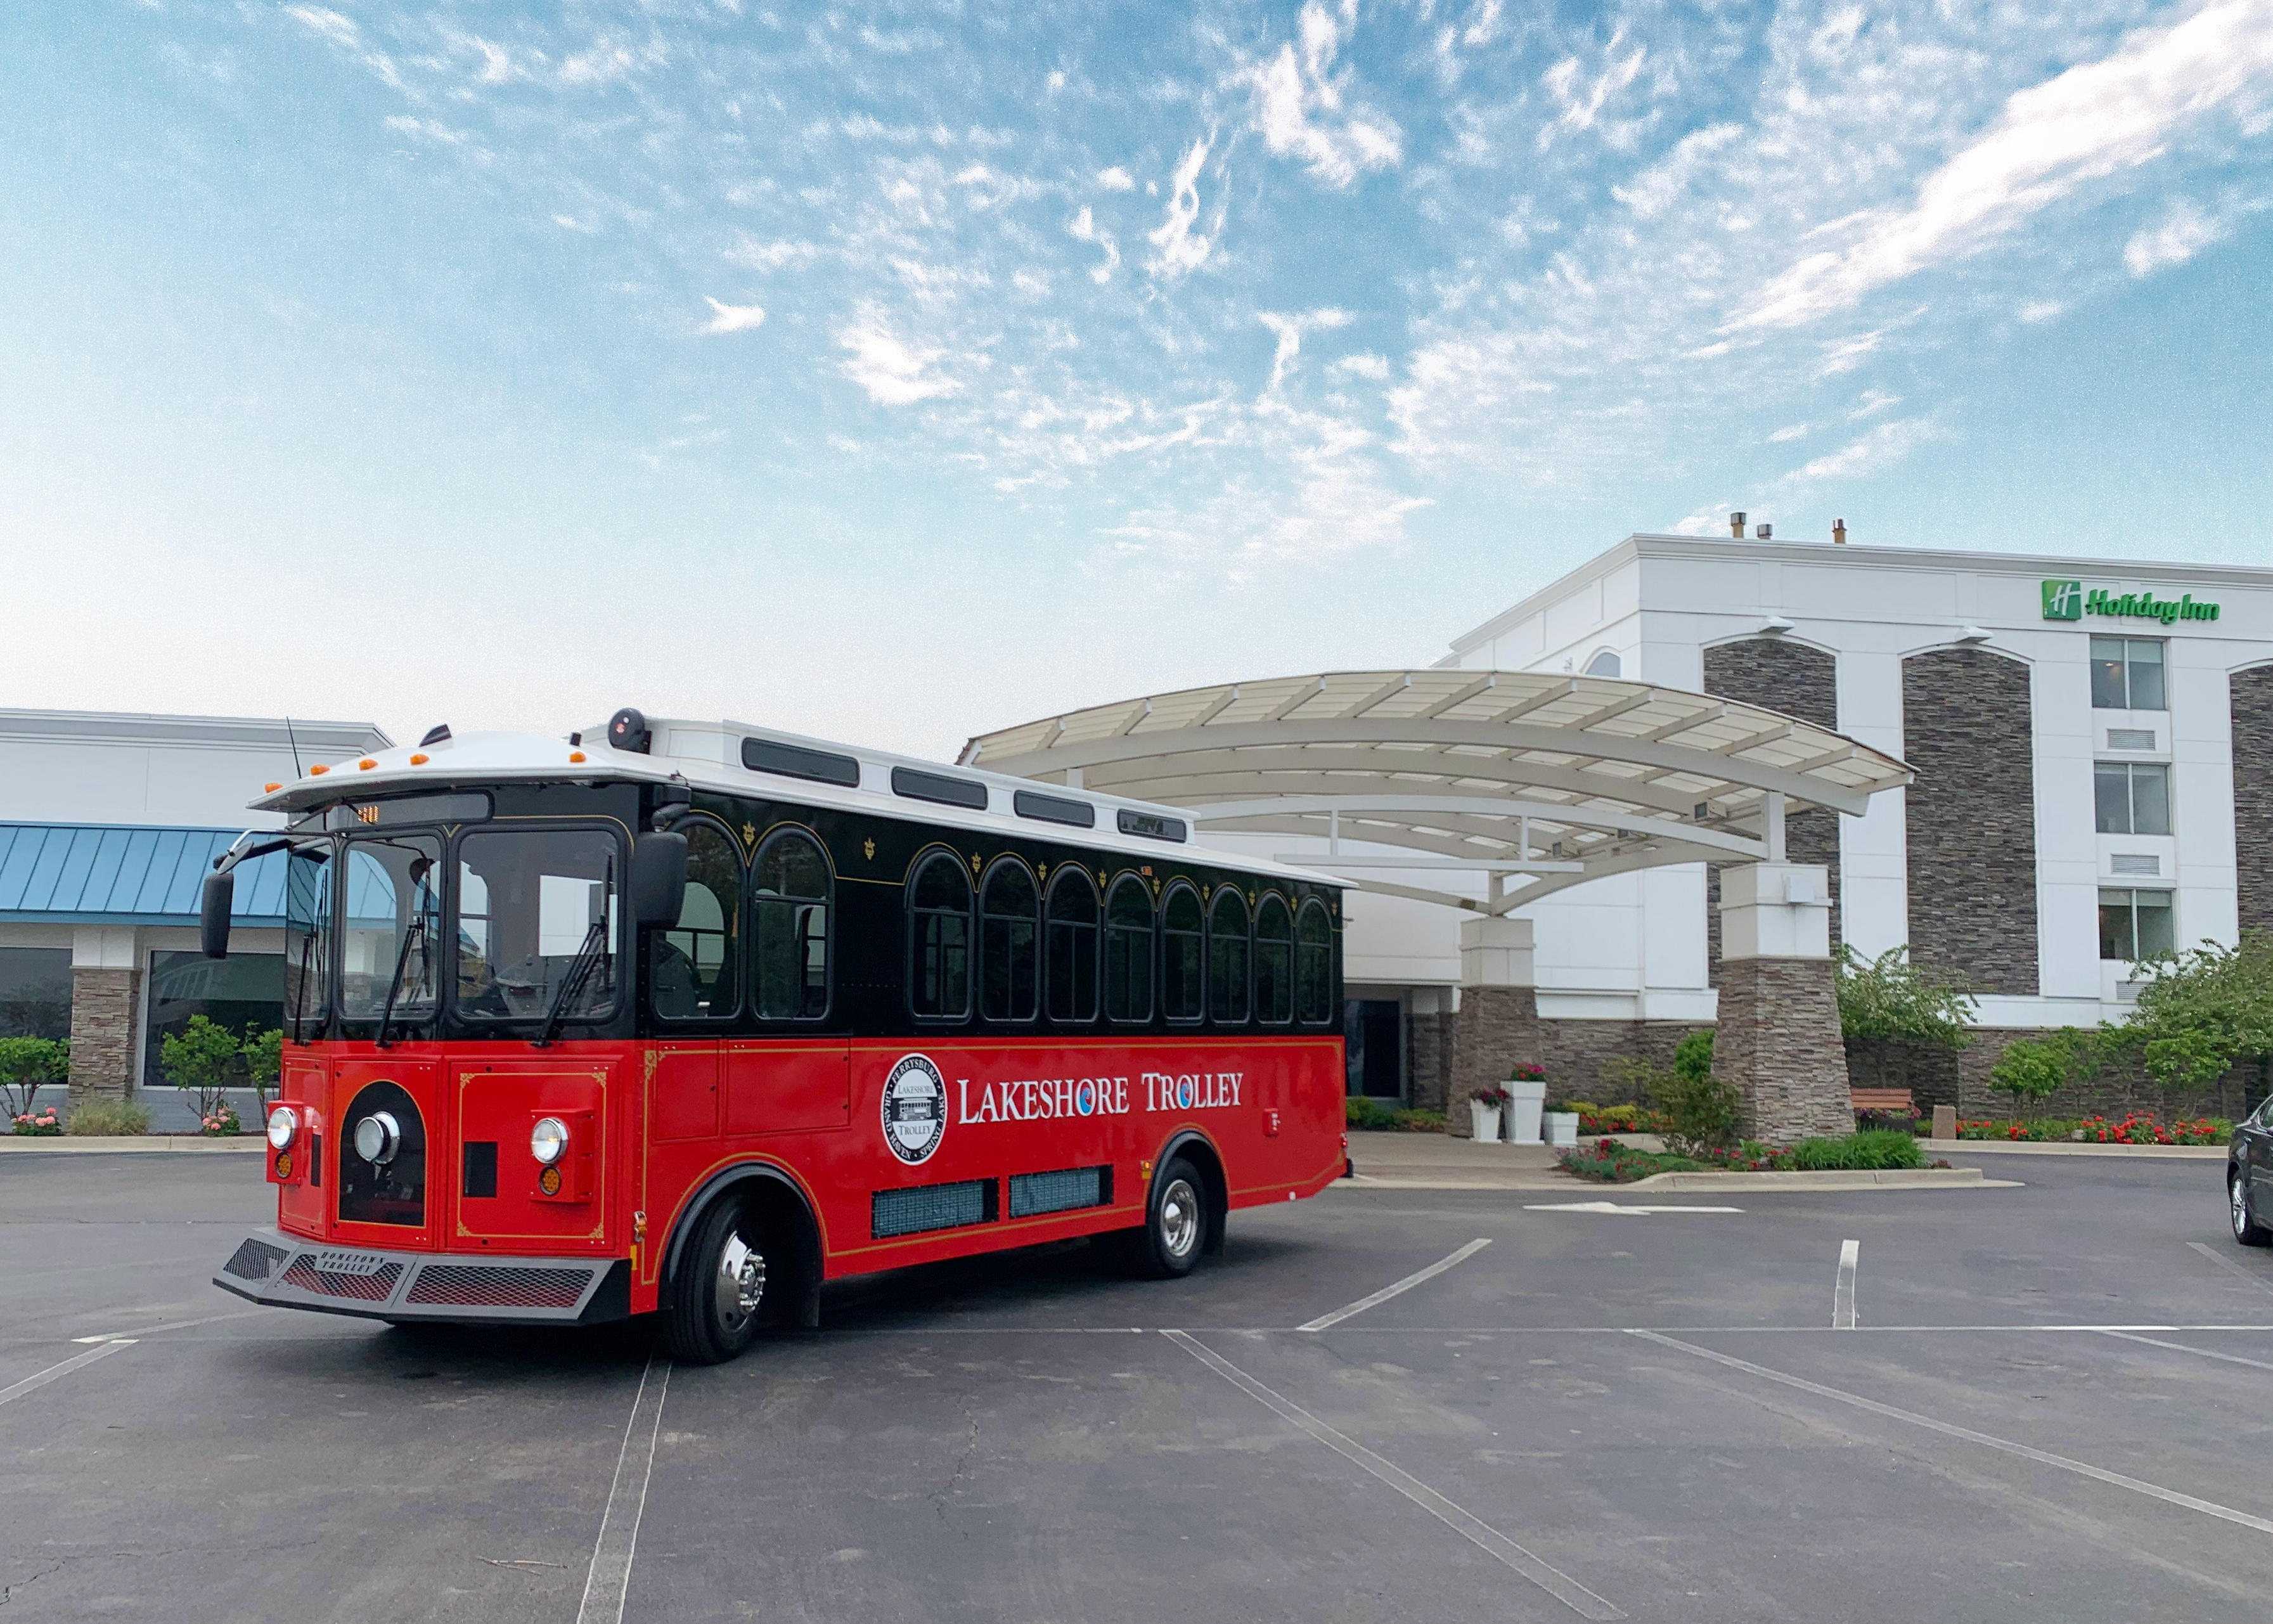 Harbor Transit's new red Lakeshore Trolley will be running a free hour-long "Laker Loop" in Spring Lake and Fruitport this summer starting at the Holiday Inn.